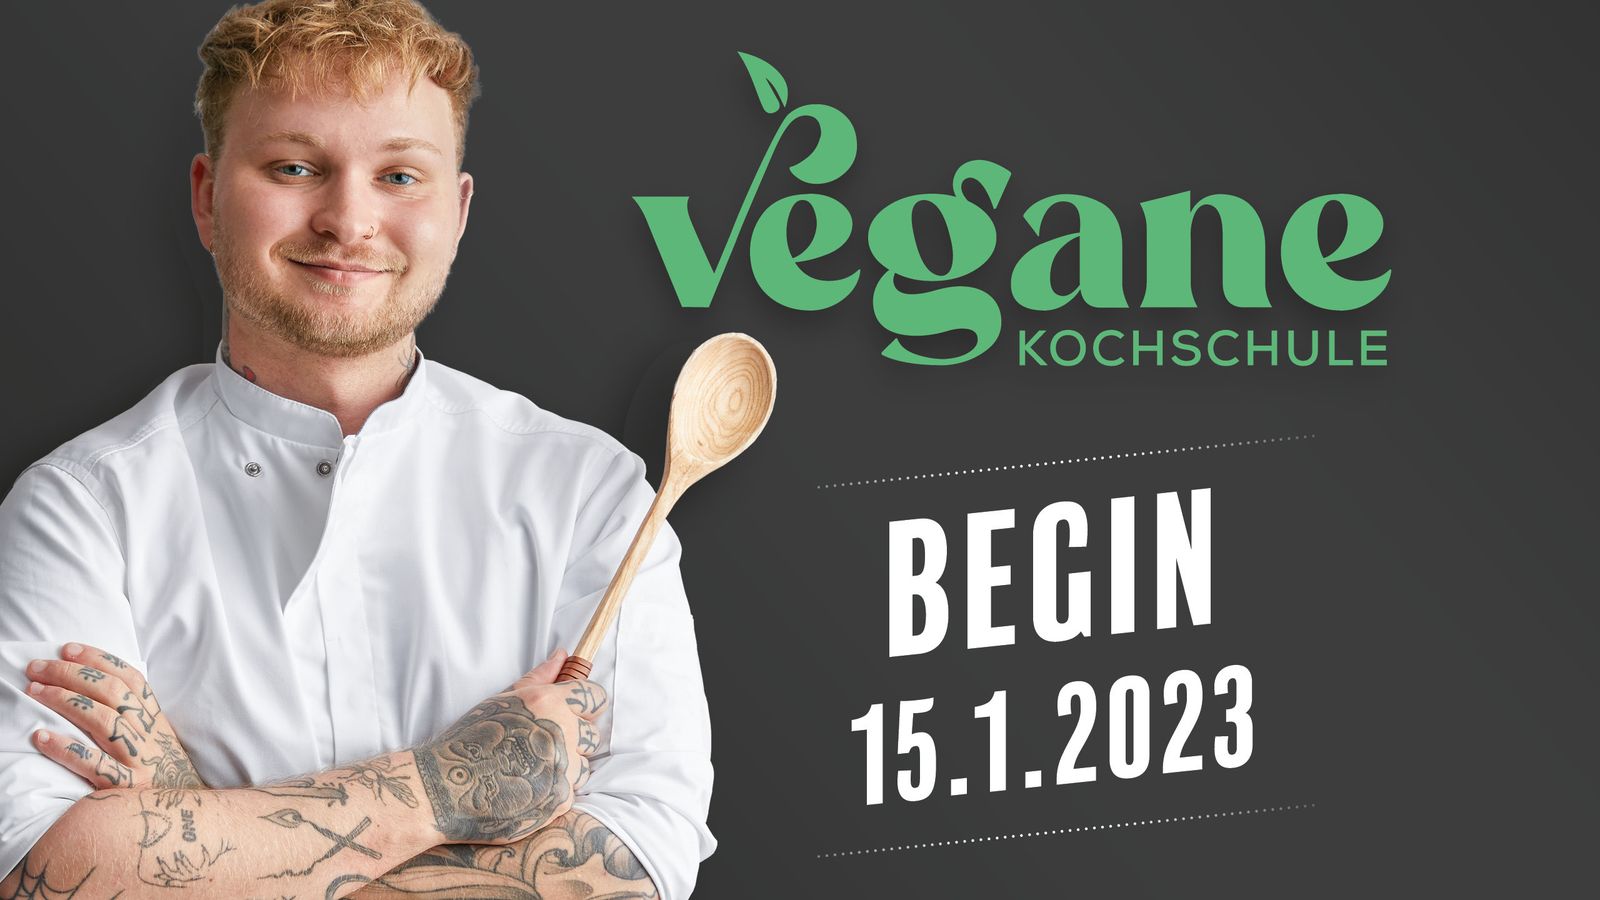 Cooking vegan like a pro: With the cooking 